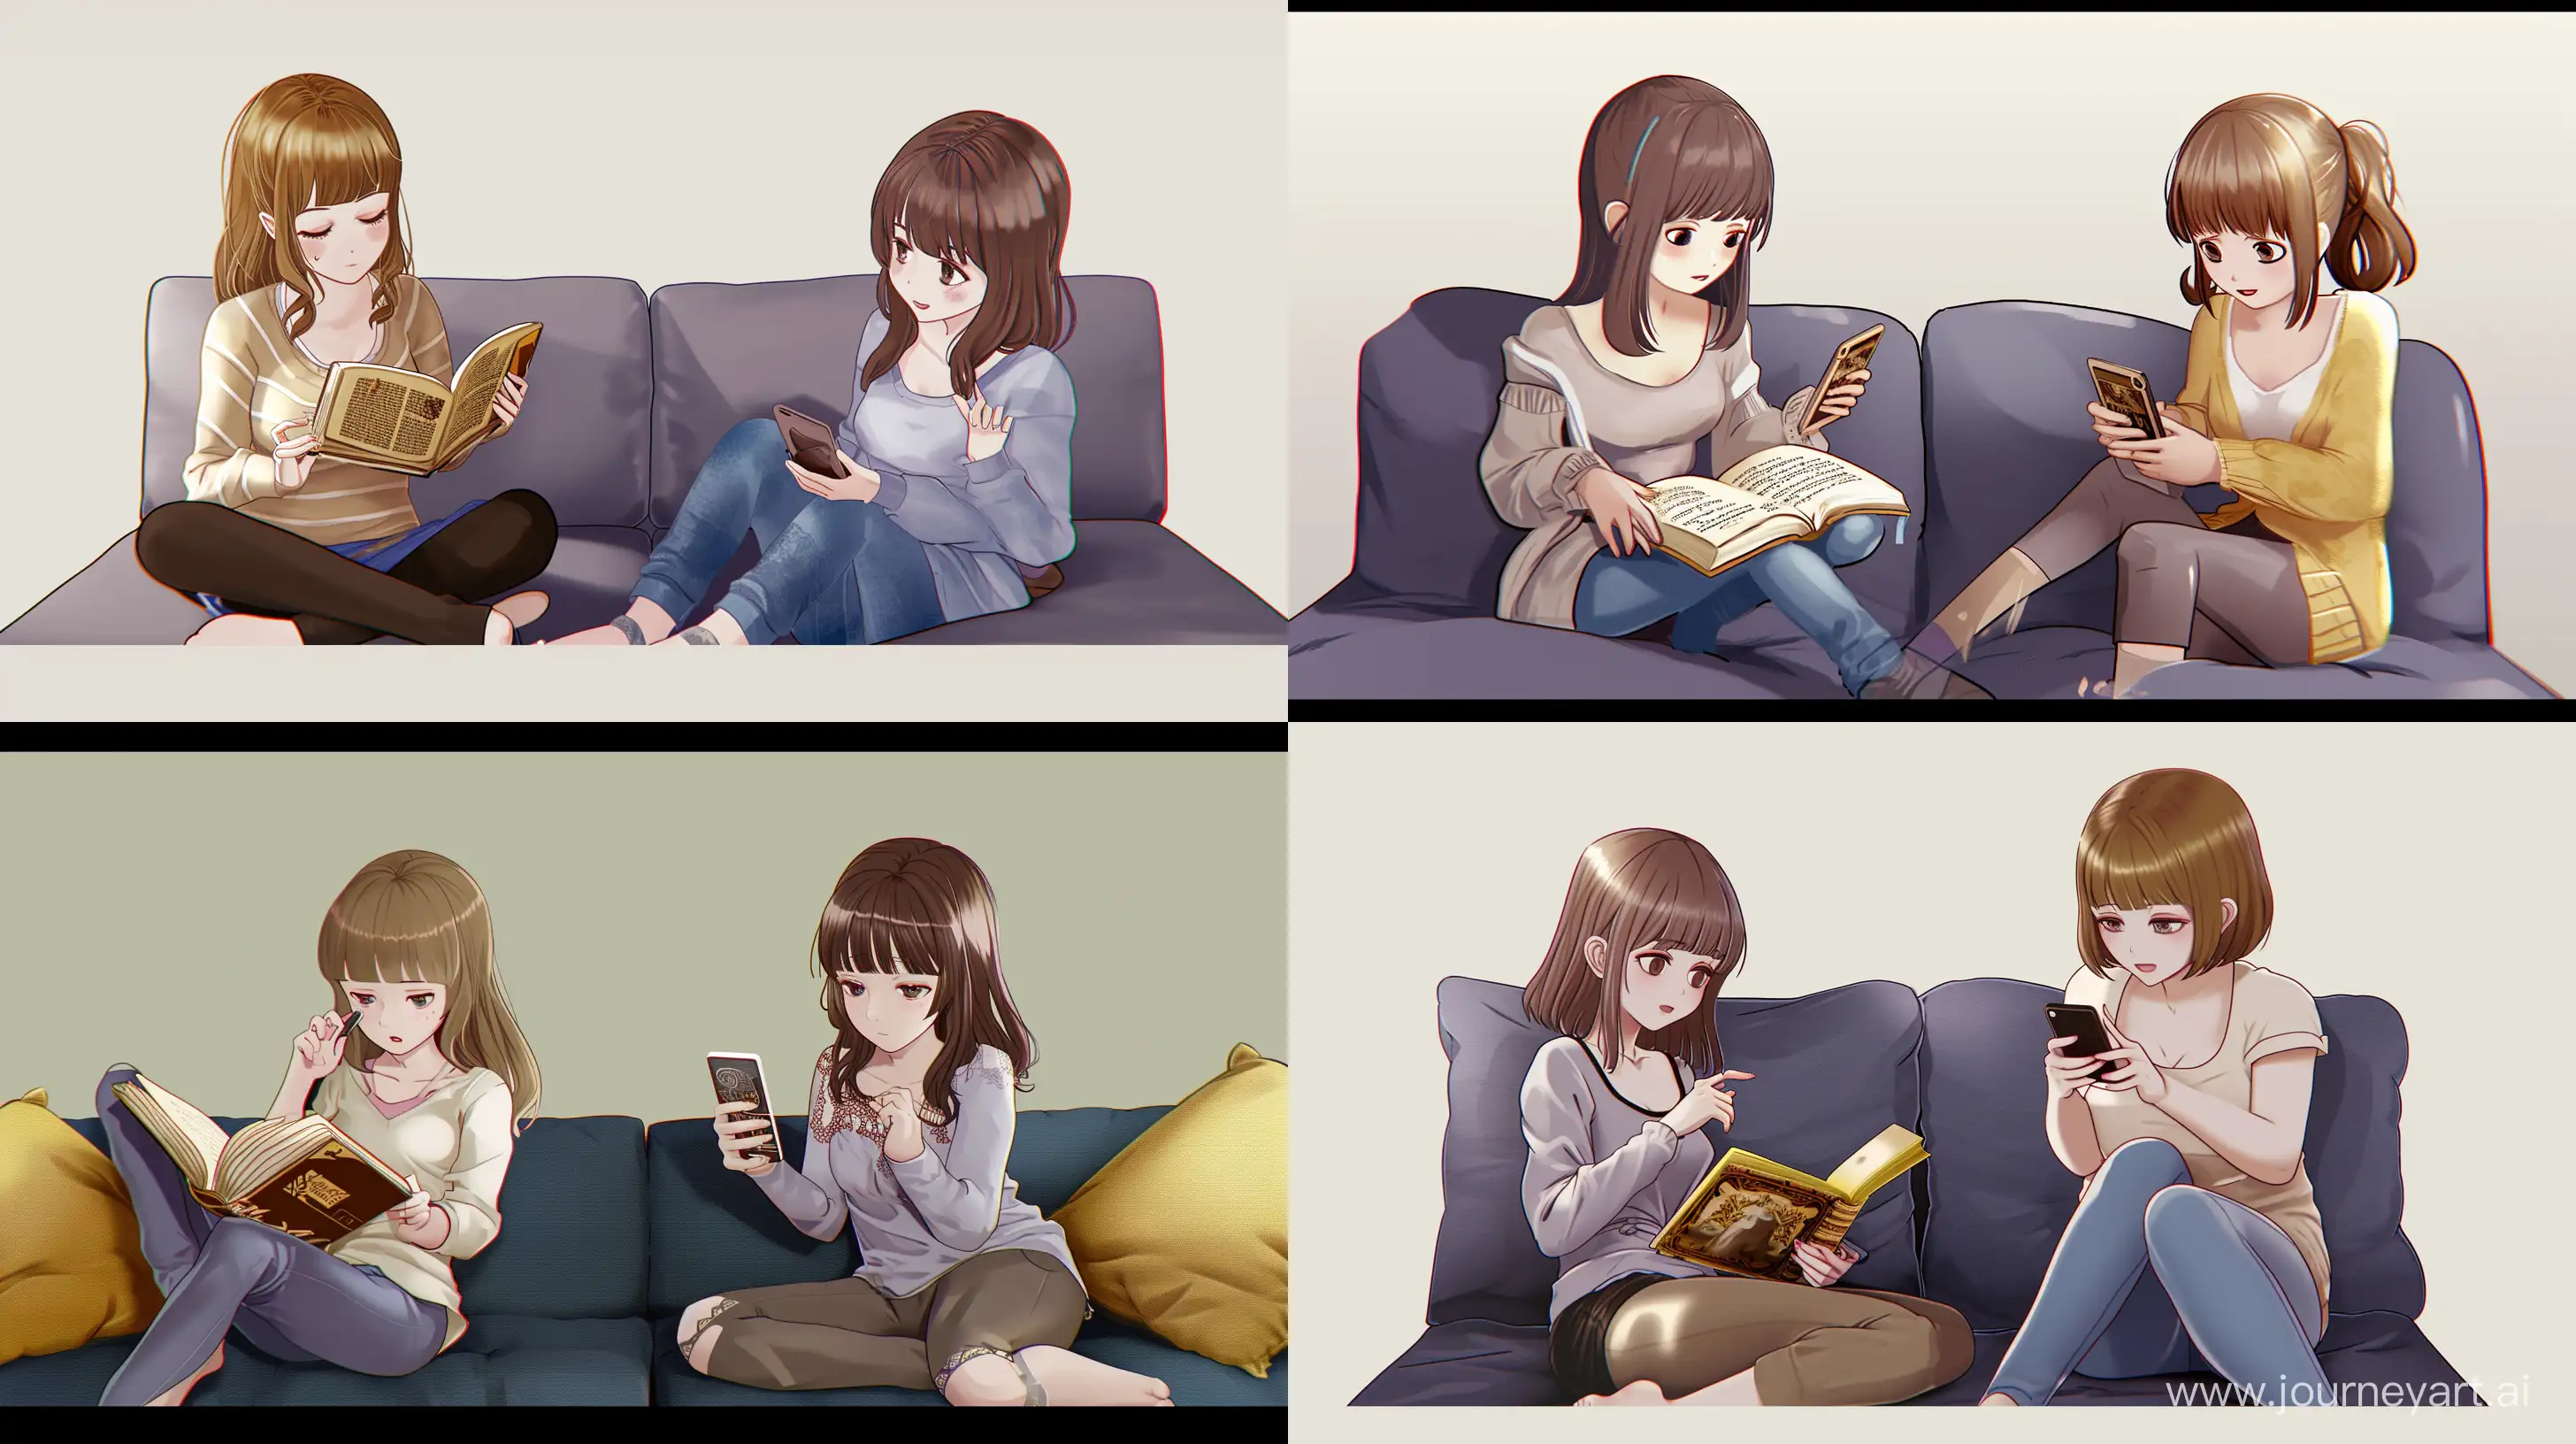 Relaxed-Anime-Girls-Reading-and-Using-Smartphone-in-Chibi-Style